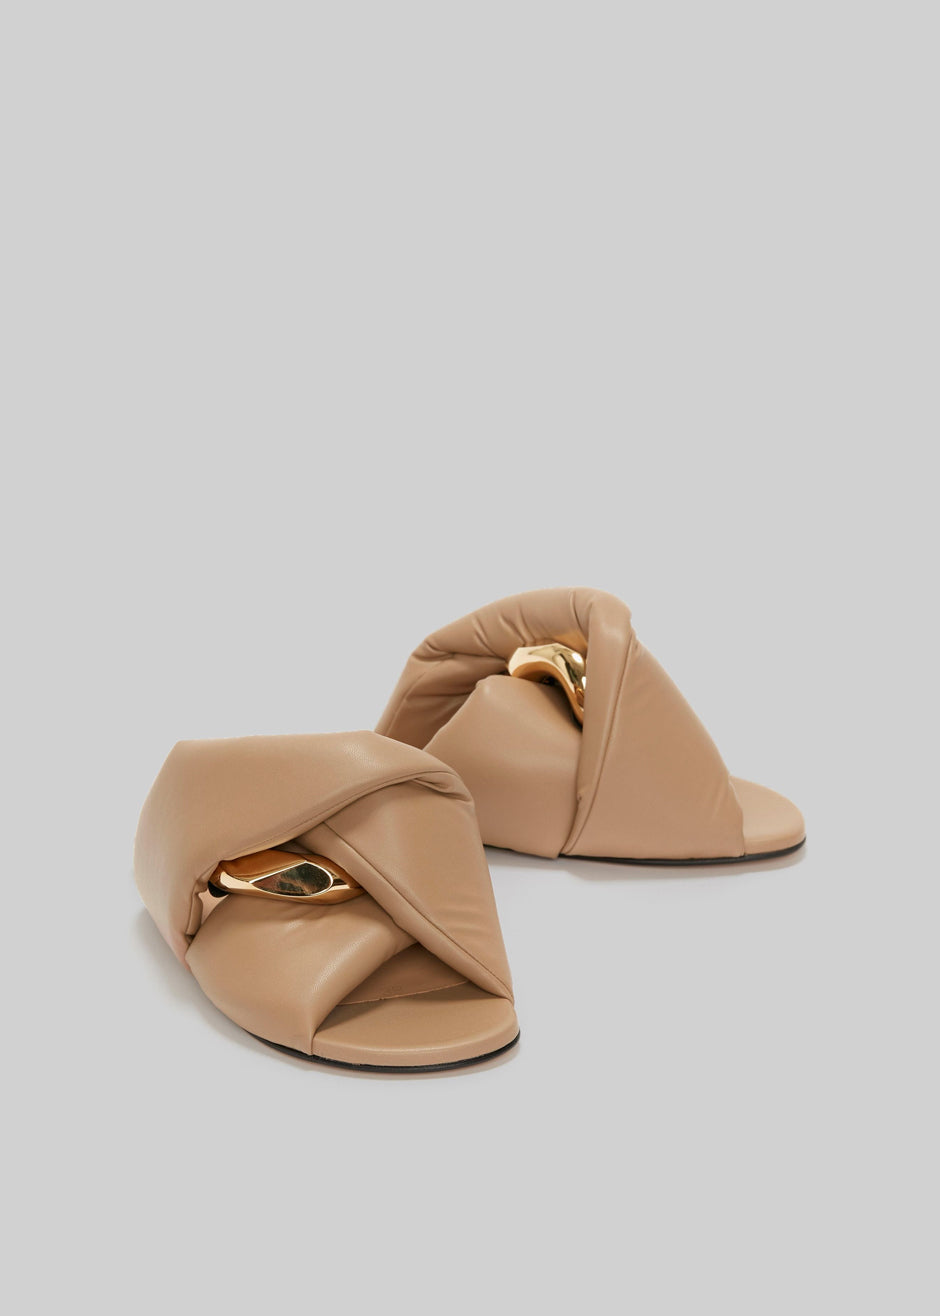 JW Anderson Chain Flat Sandals - Taupe - 4